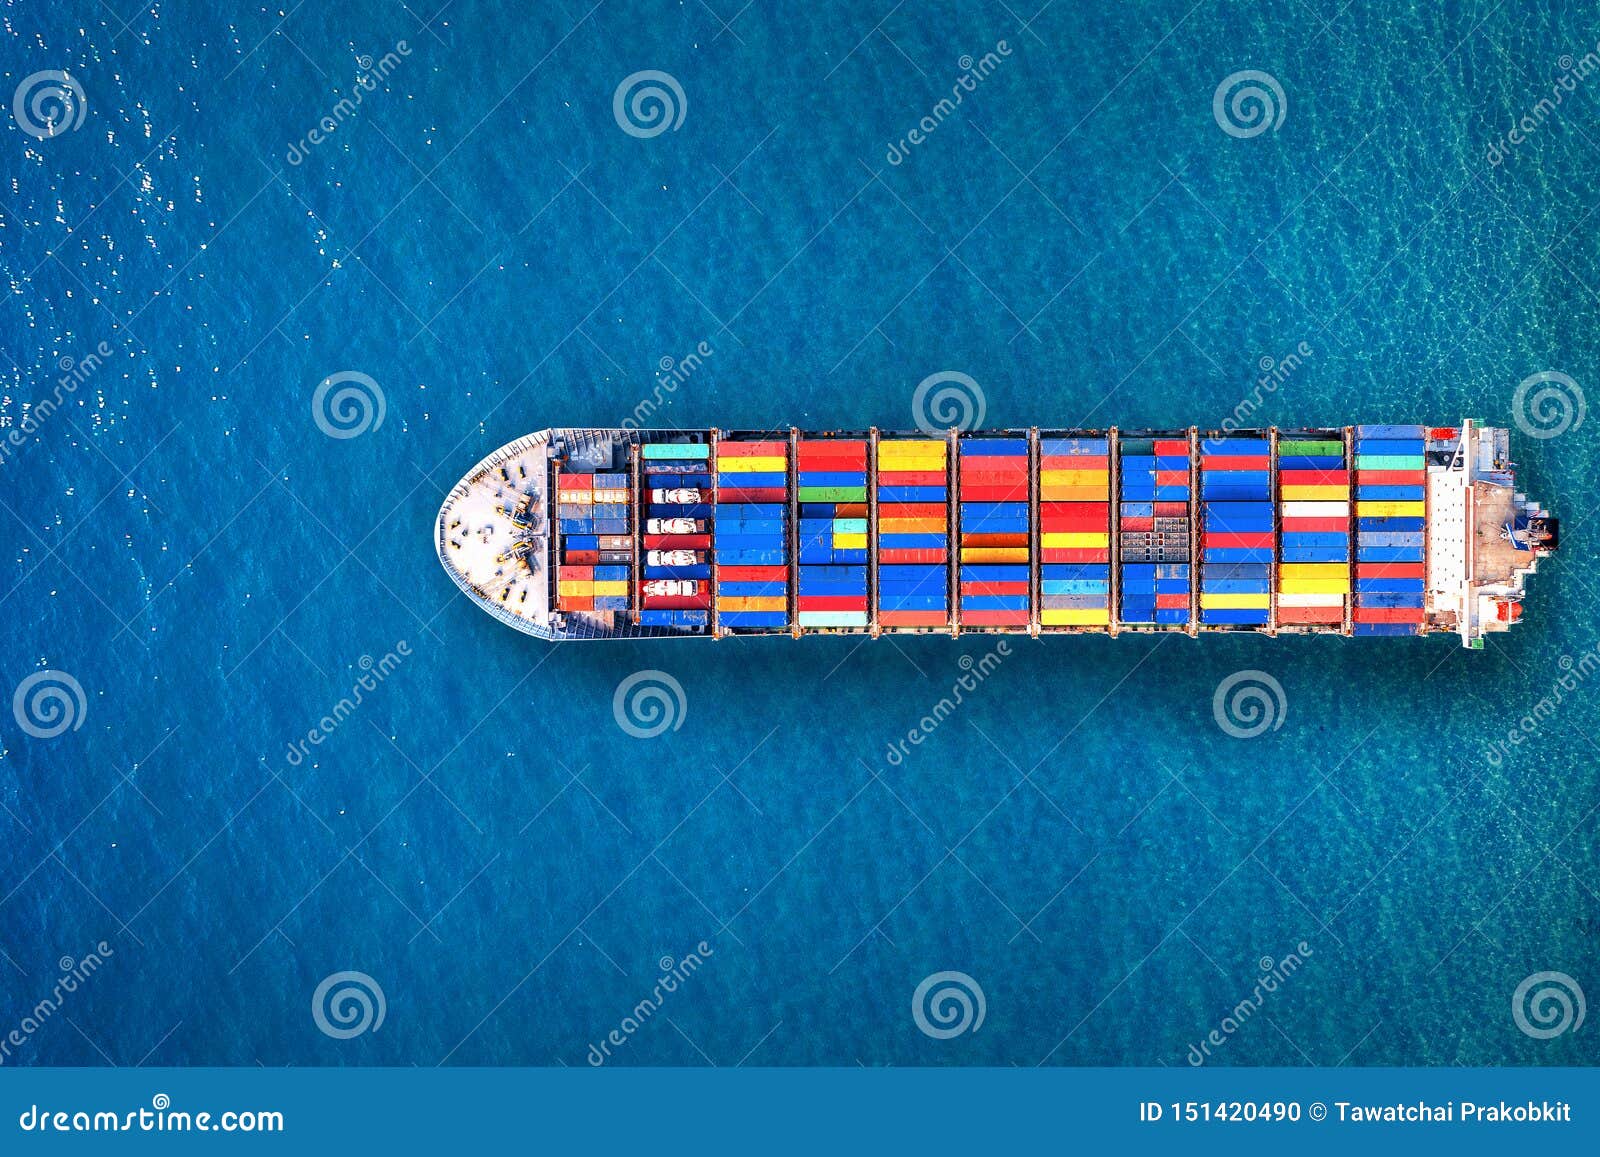 aerial view of container cargo ship in sea.